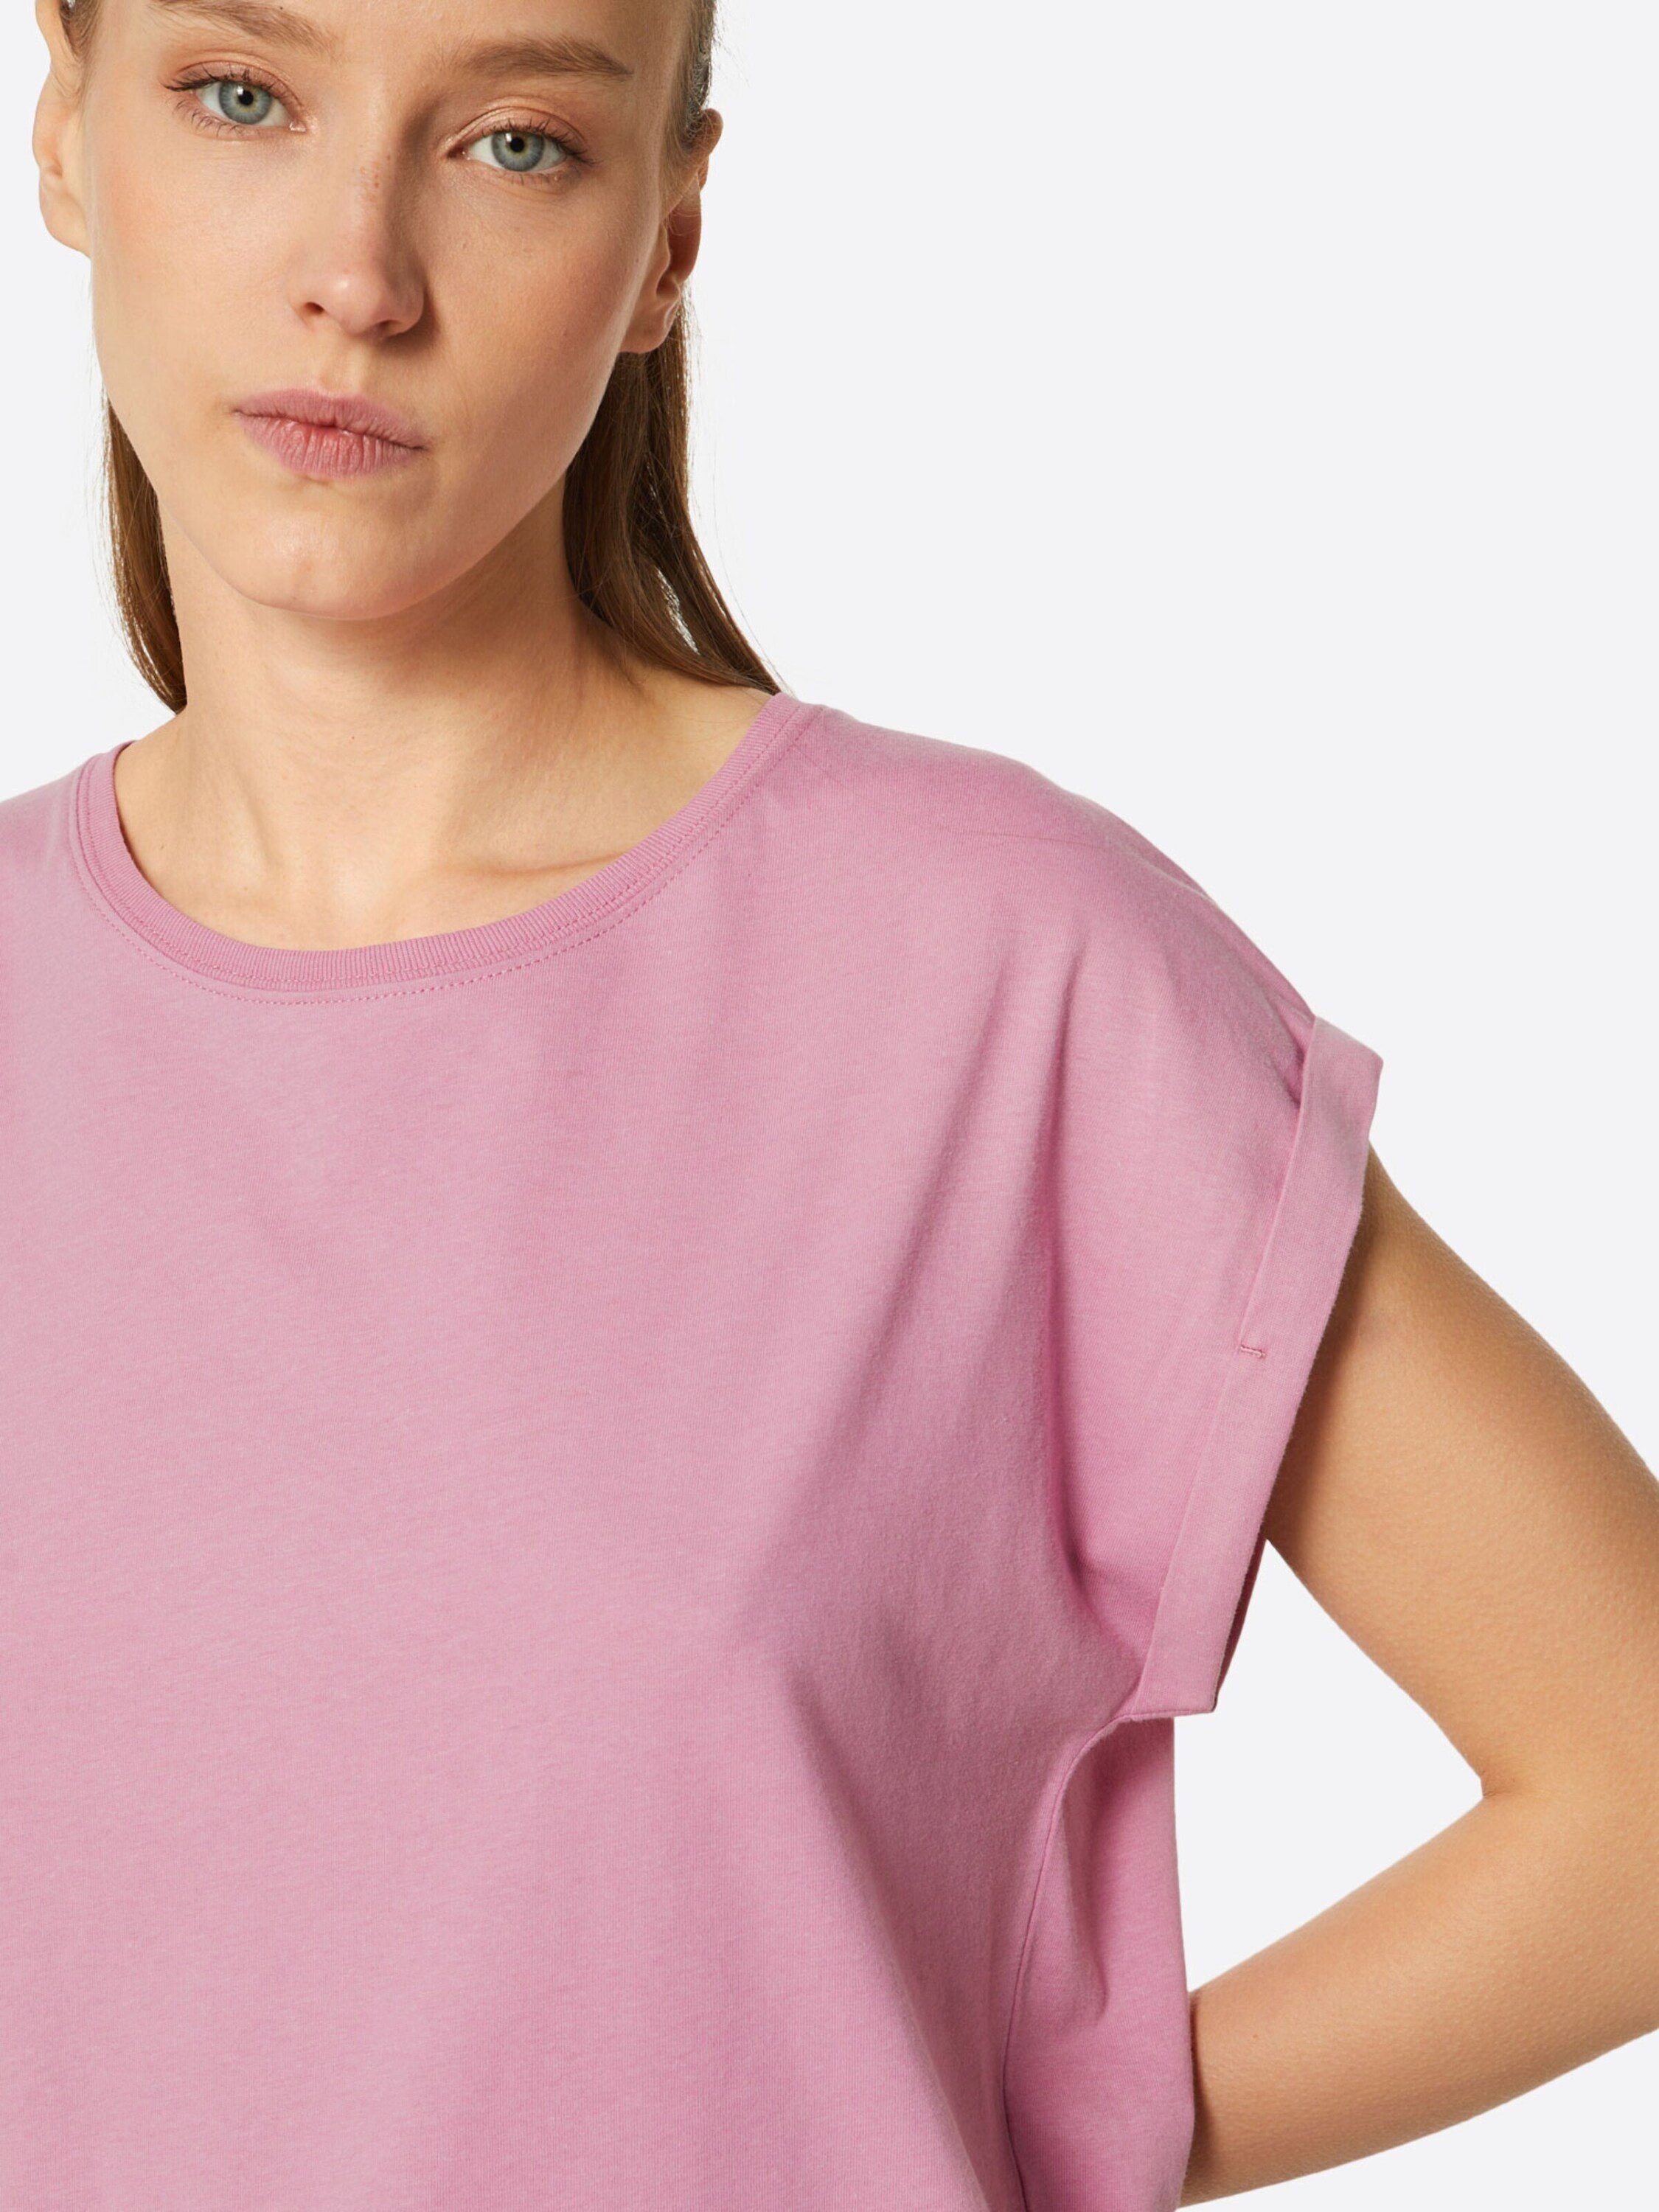 URBAN CLASSICS T-Shirt (1-tlg) coolpink Shoulder Details, TB771 Plain/ohne Detail Weiteres Extended